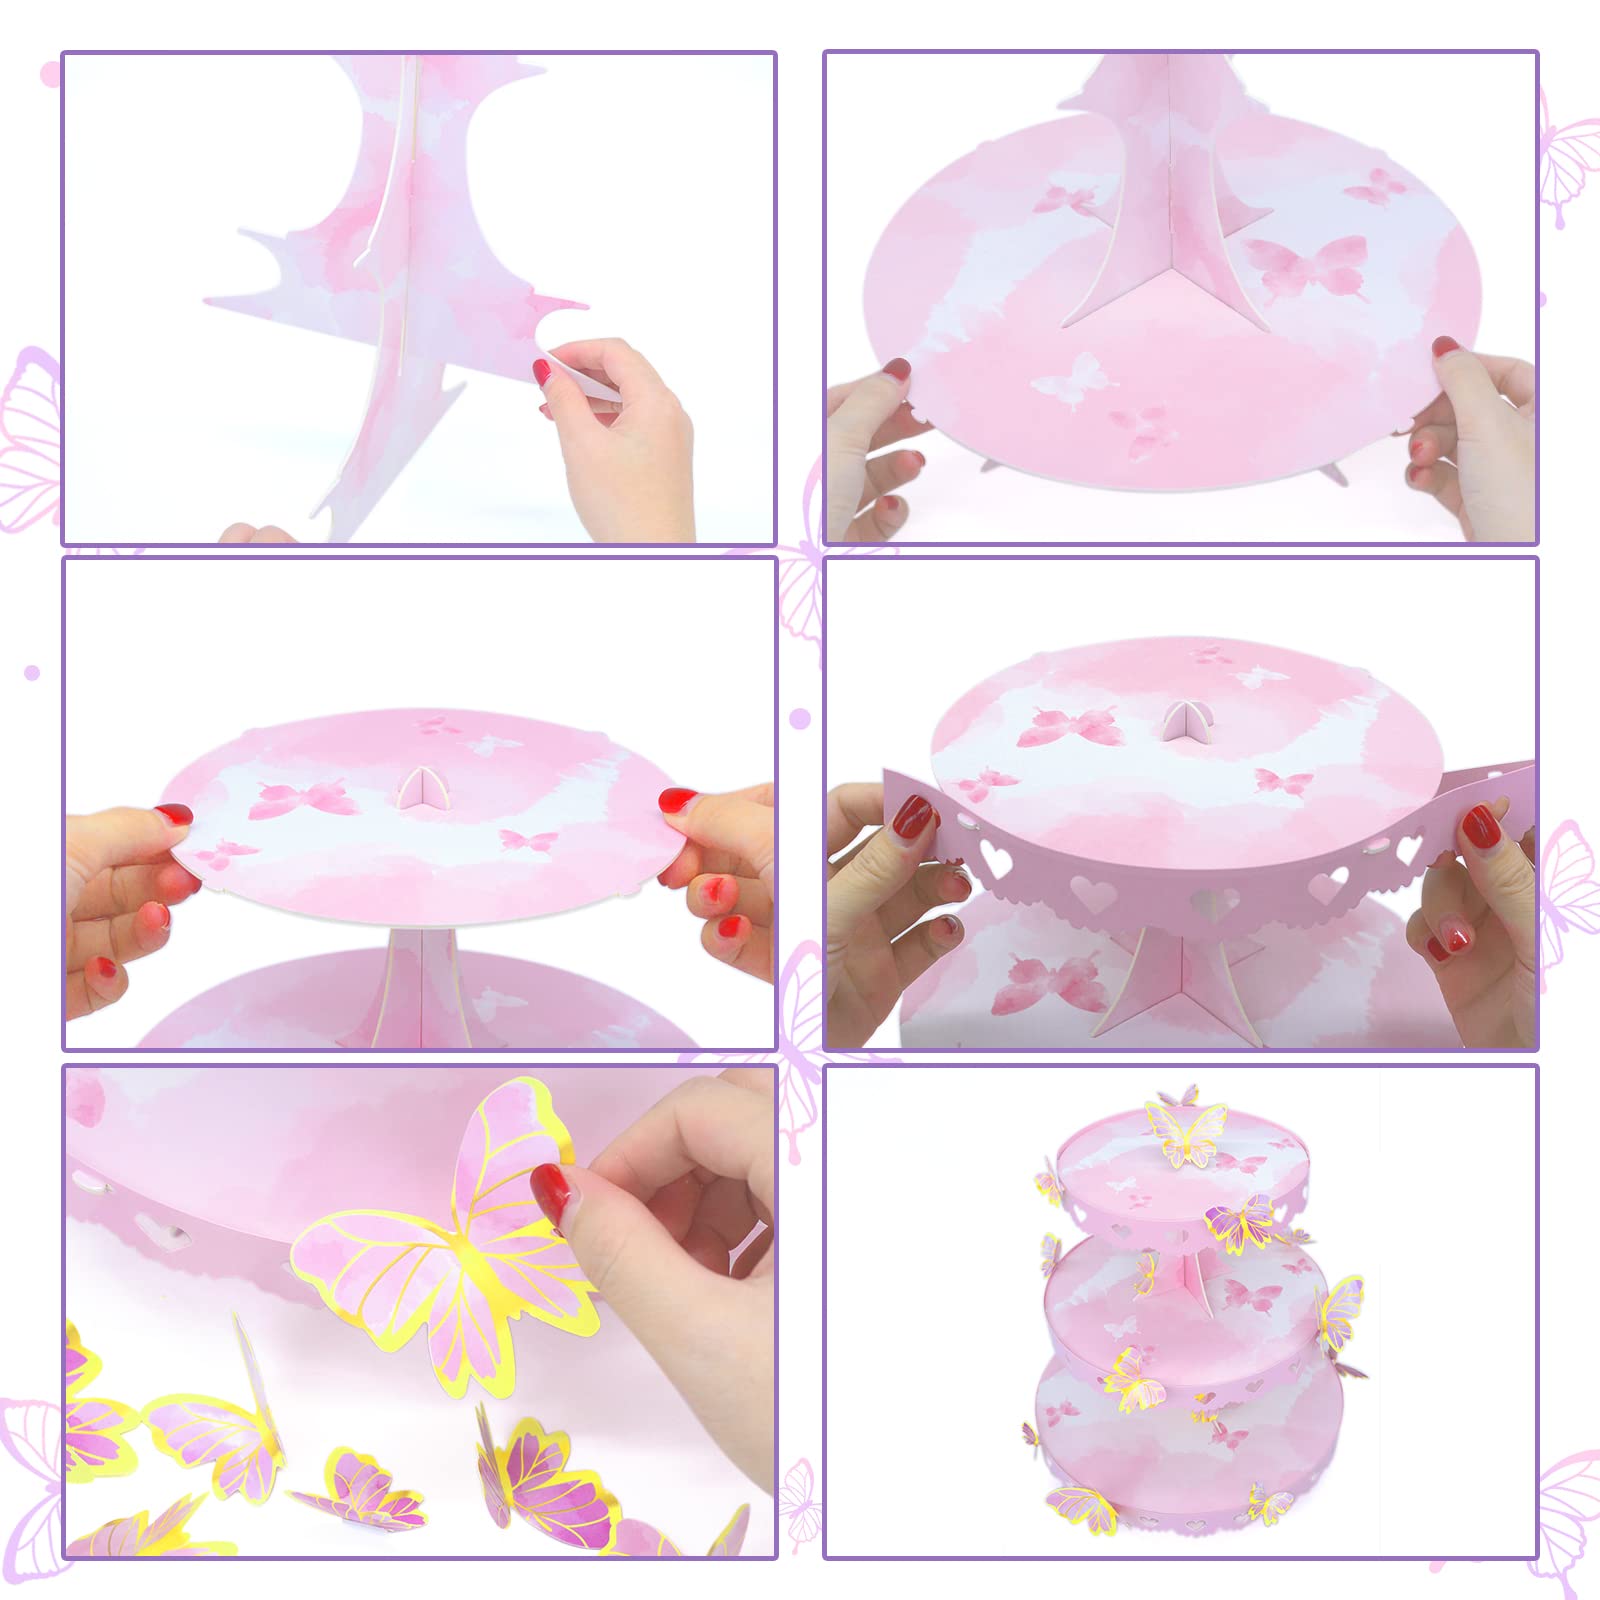 WEEPA Butterfly Cupcake Stand Birthday Party Supplies 3-Tier Round Cupcake Stand DIY Pink Cake Stand Display Table for Theme Party Birthday Baby Shower Wedding